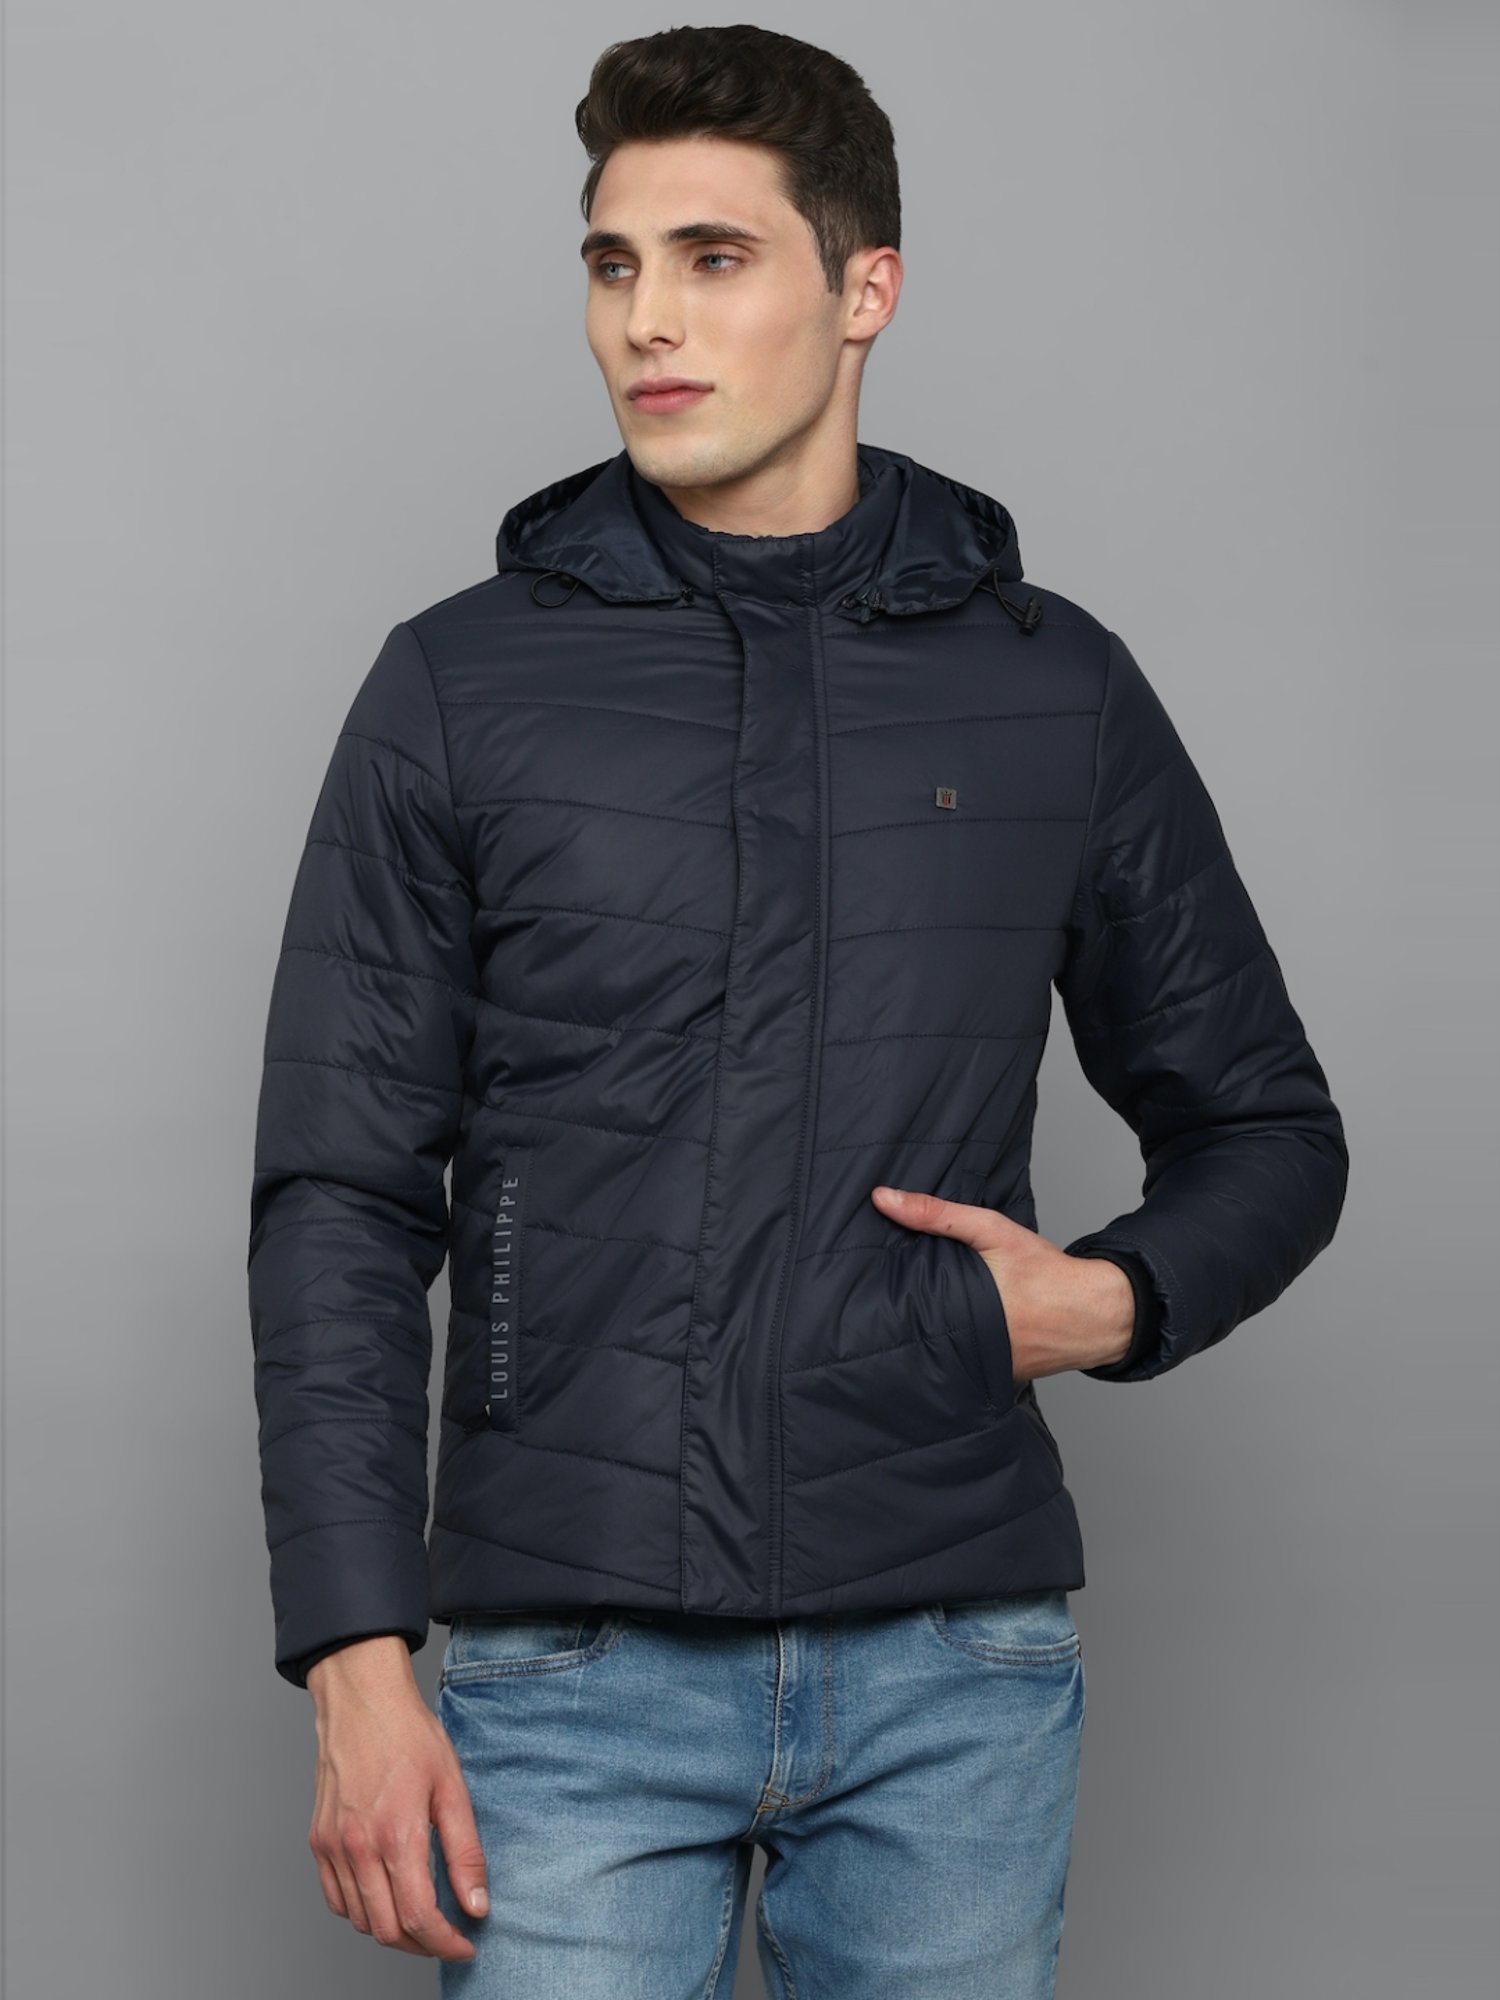 Buy Reversible Bomber Jacket Online at Best Prices in India - JioMart.